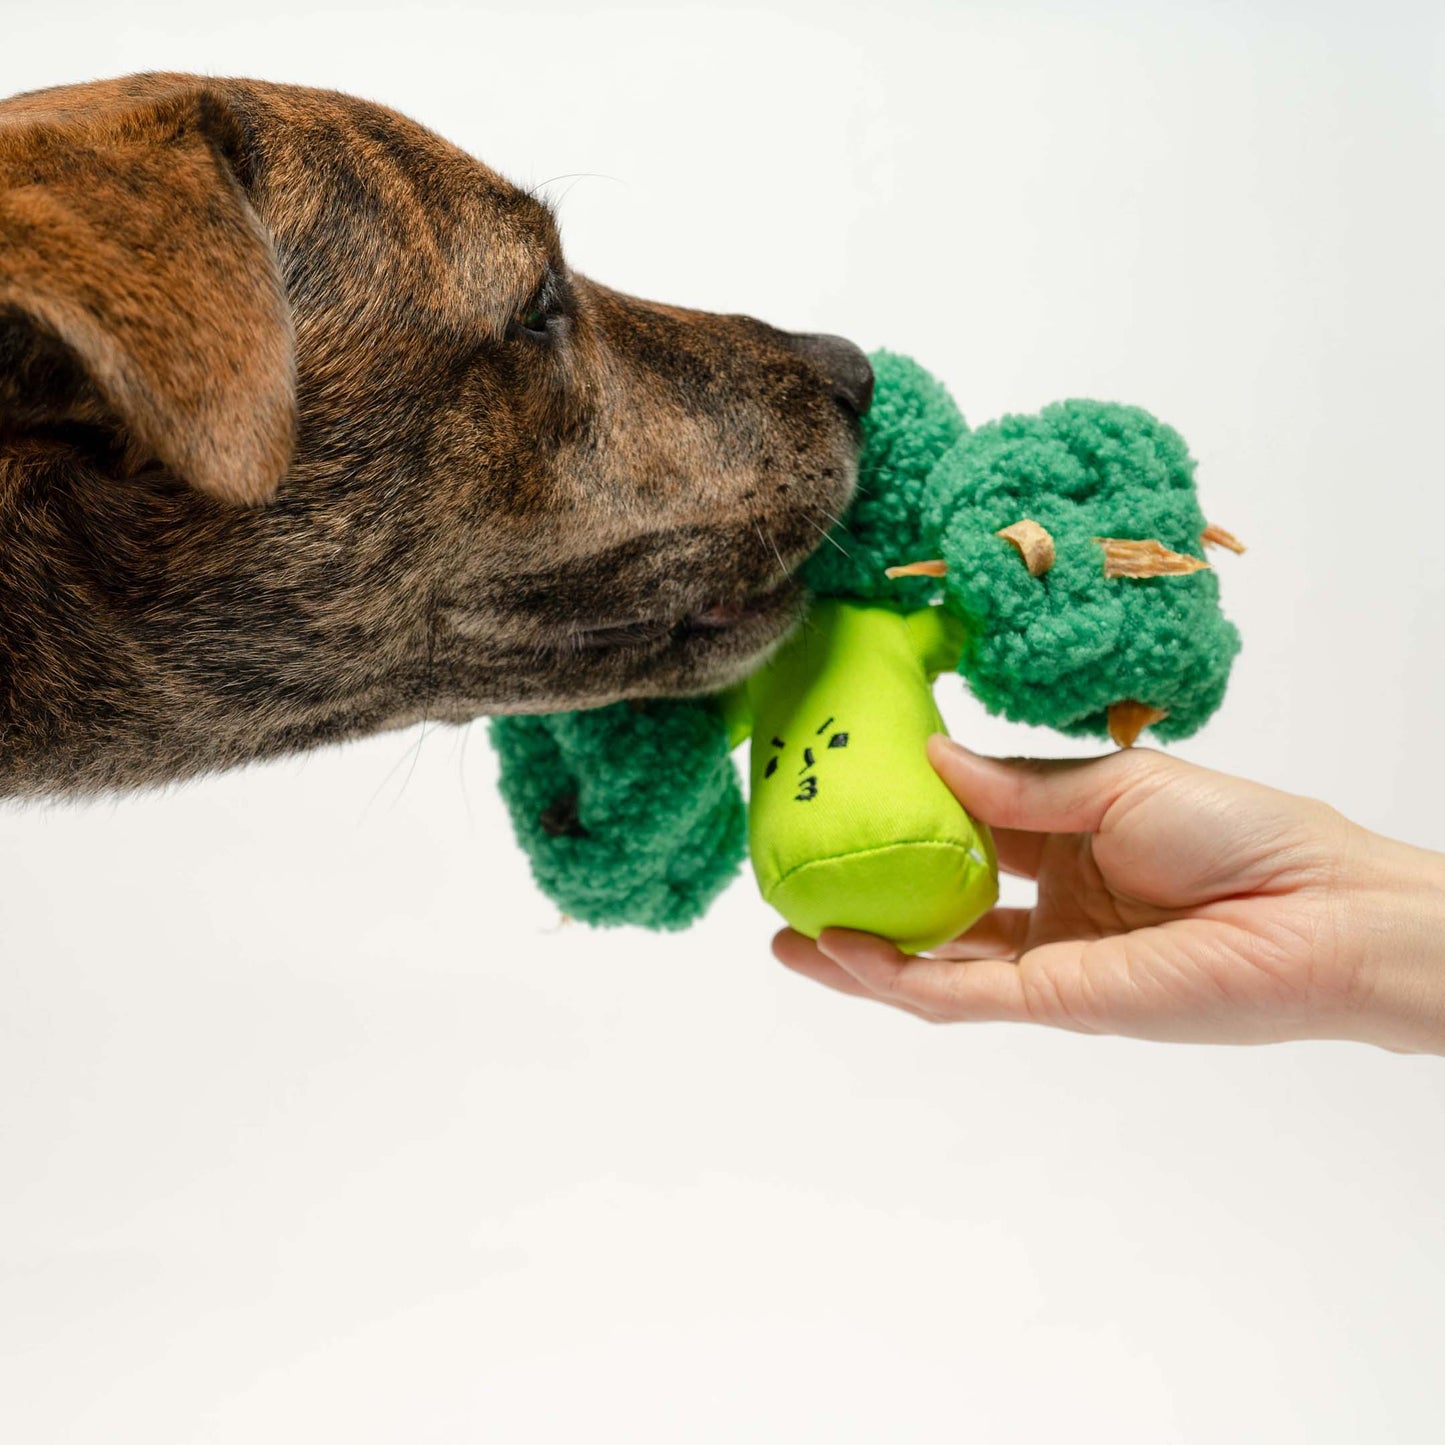 Broccoli Nose Work Toy by The Furry Folks